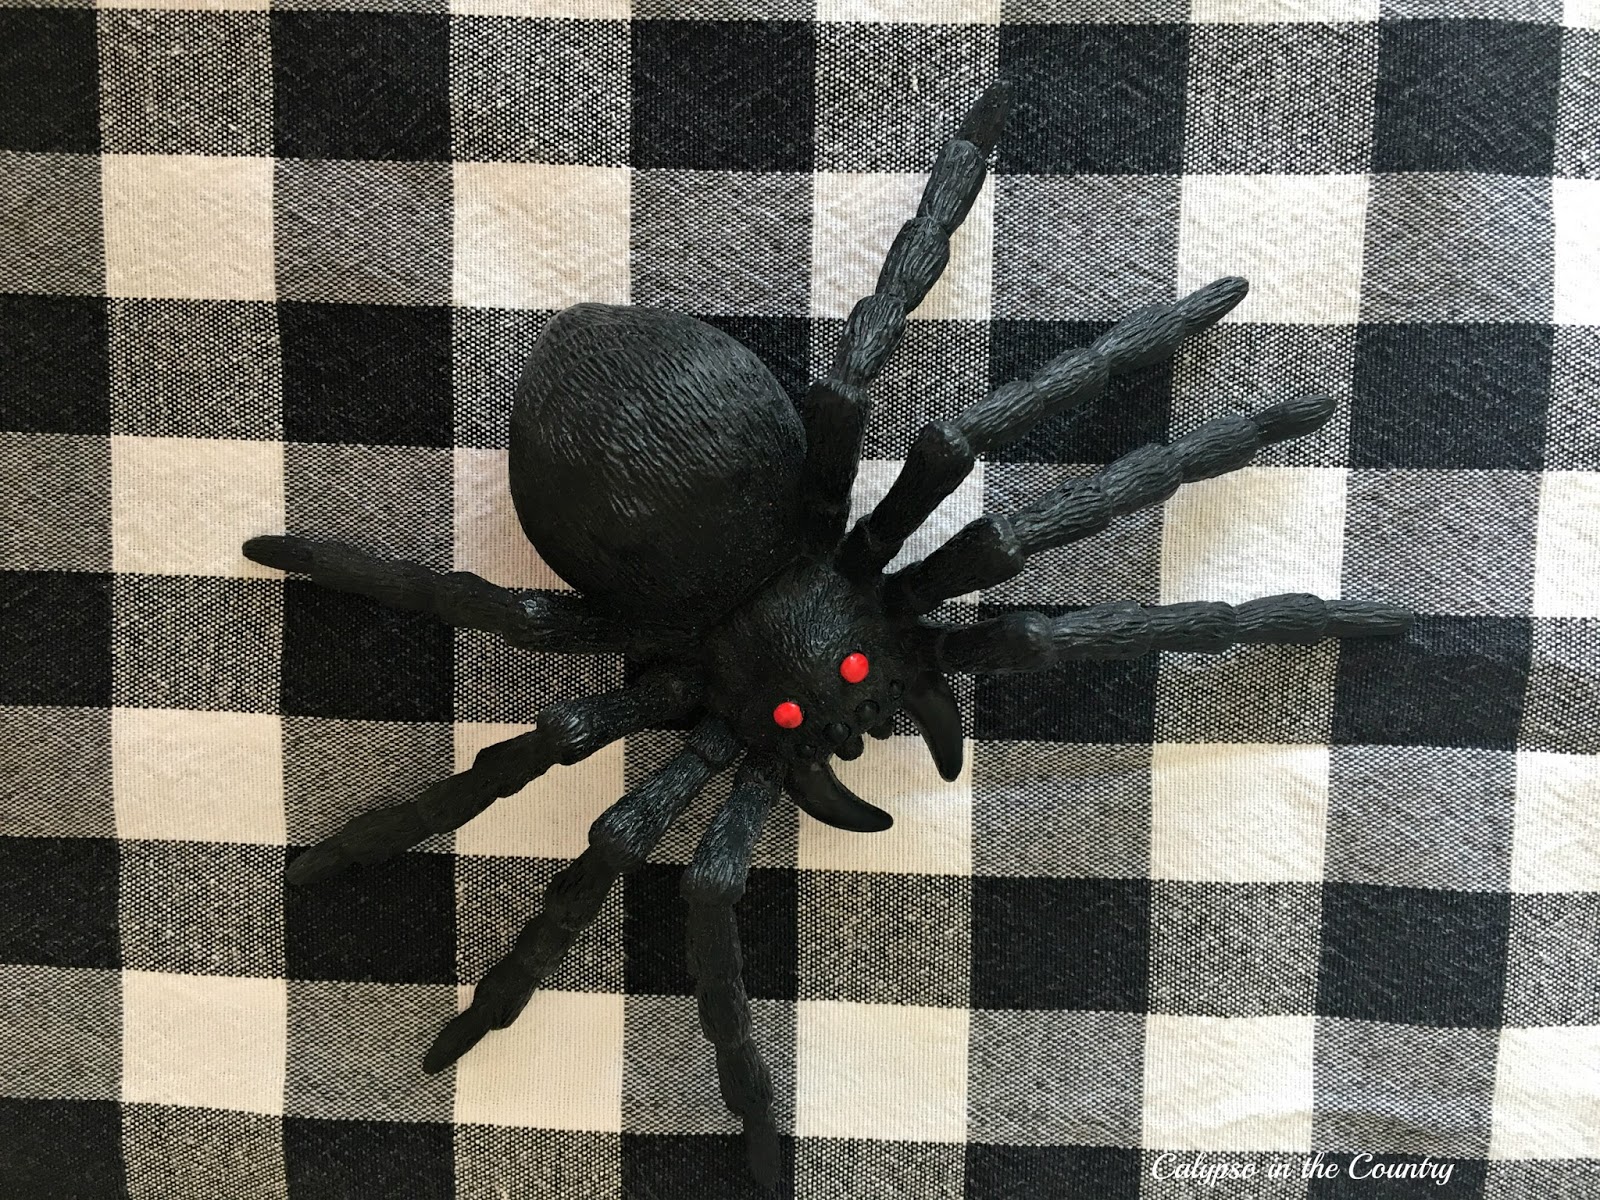 Plastic spider - and other cute ideas to fill Halloween gift bags